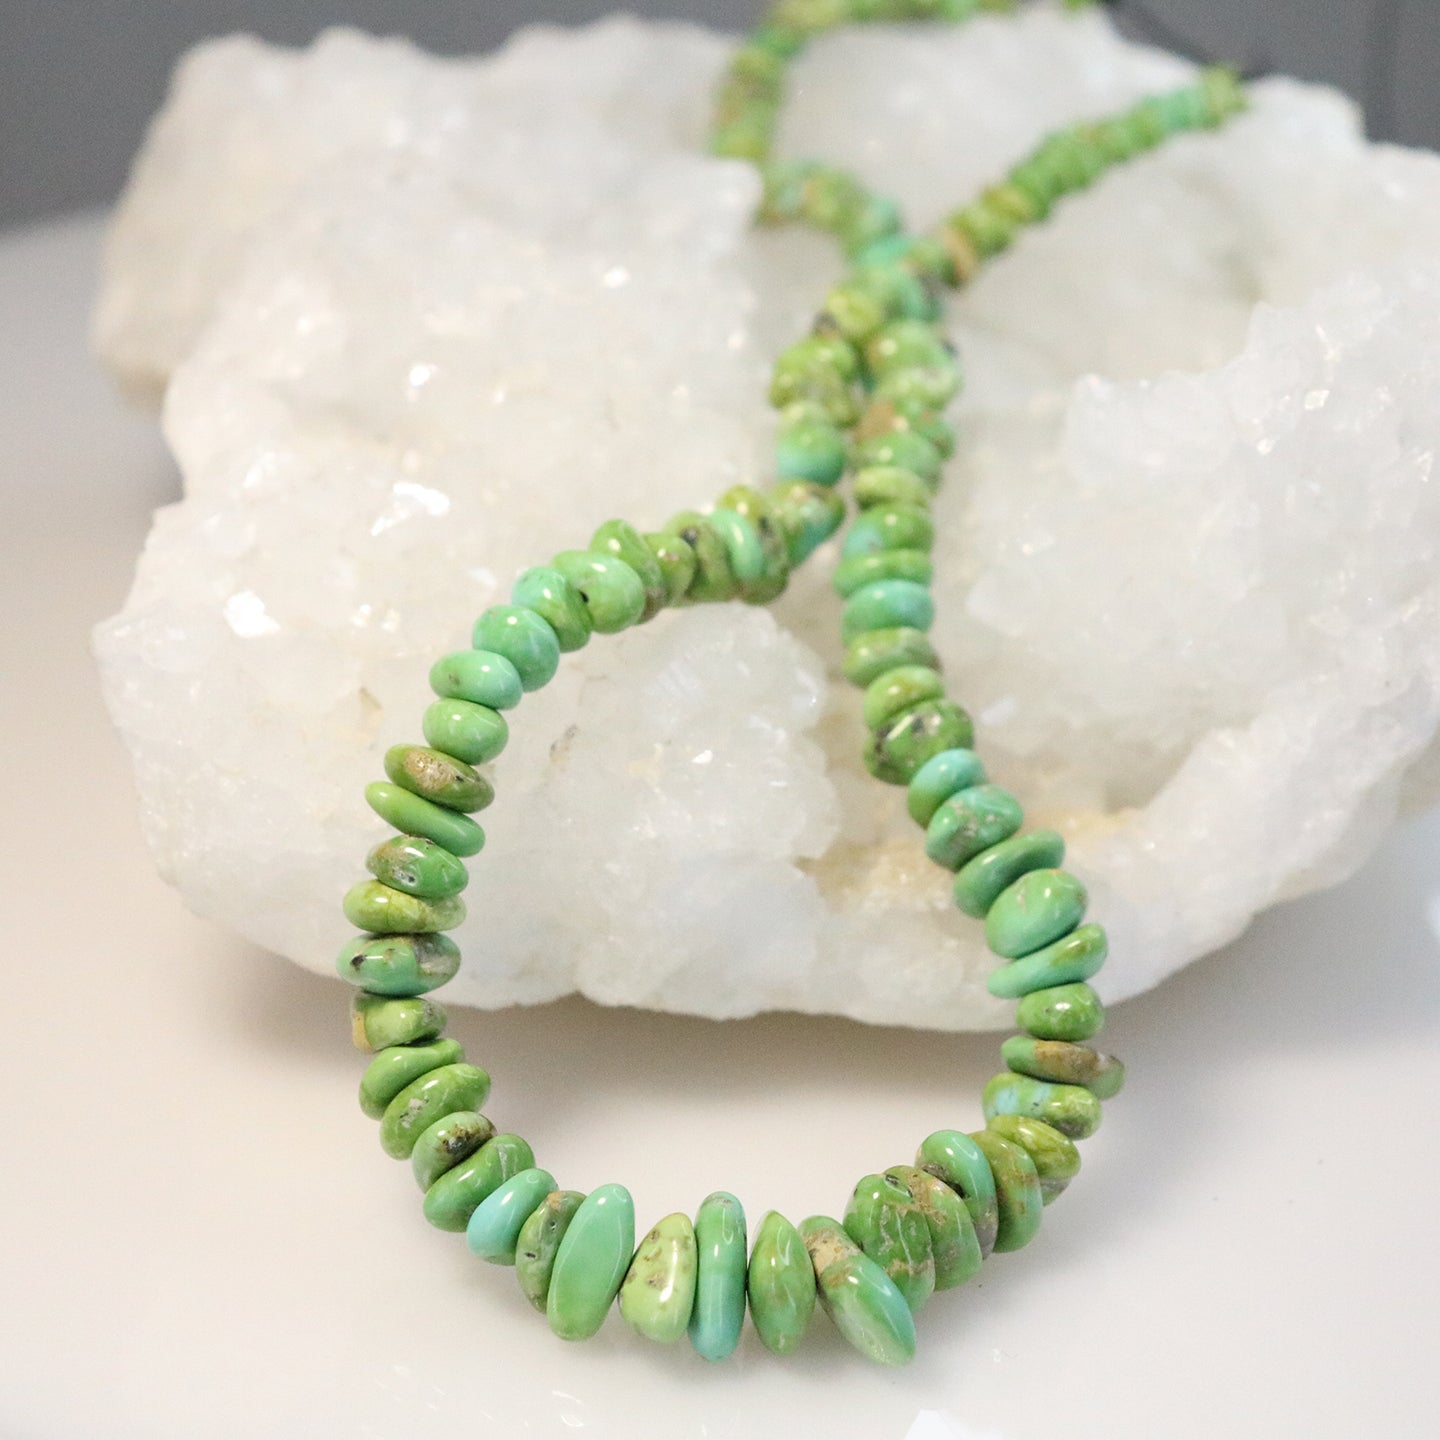 Sonoran Gold Turquoise Beads Lime Green 5.5mm Heshi 16